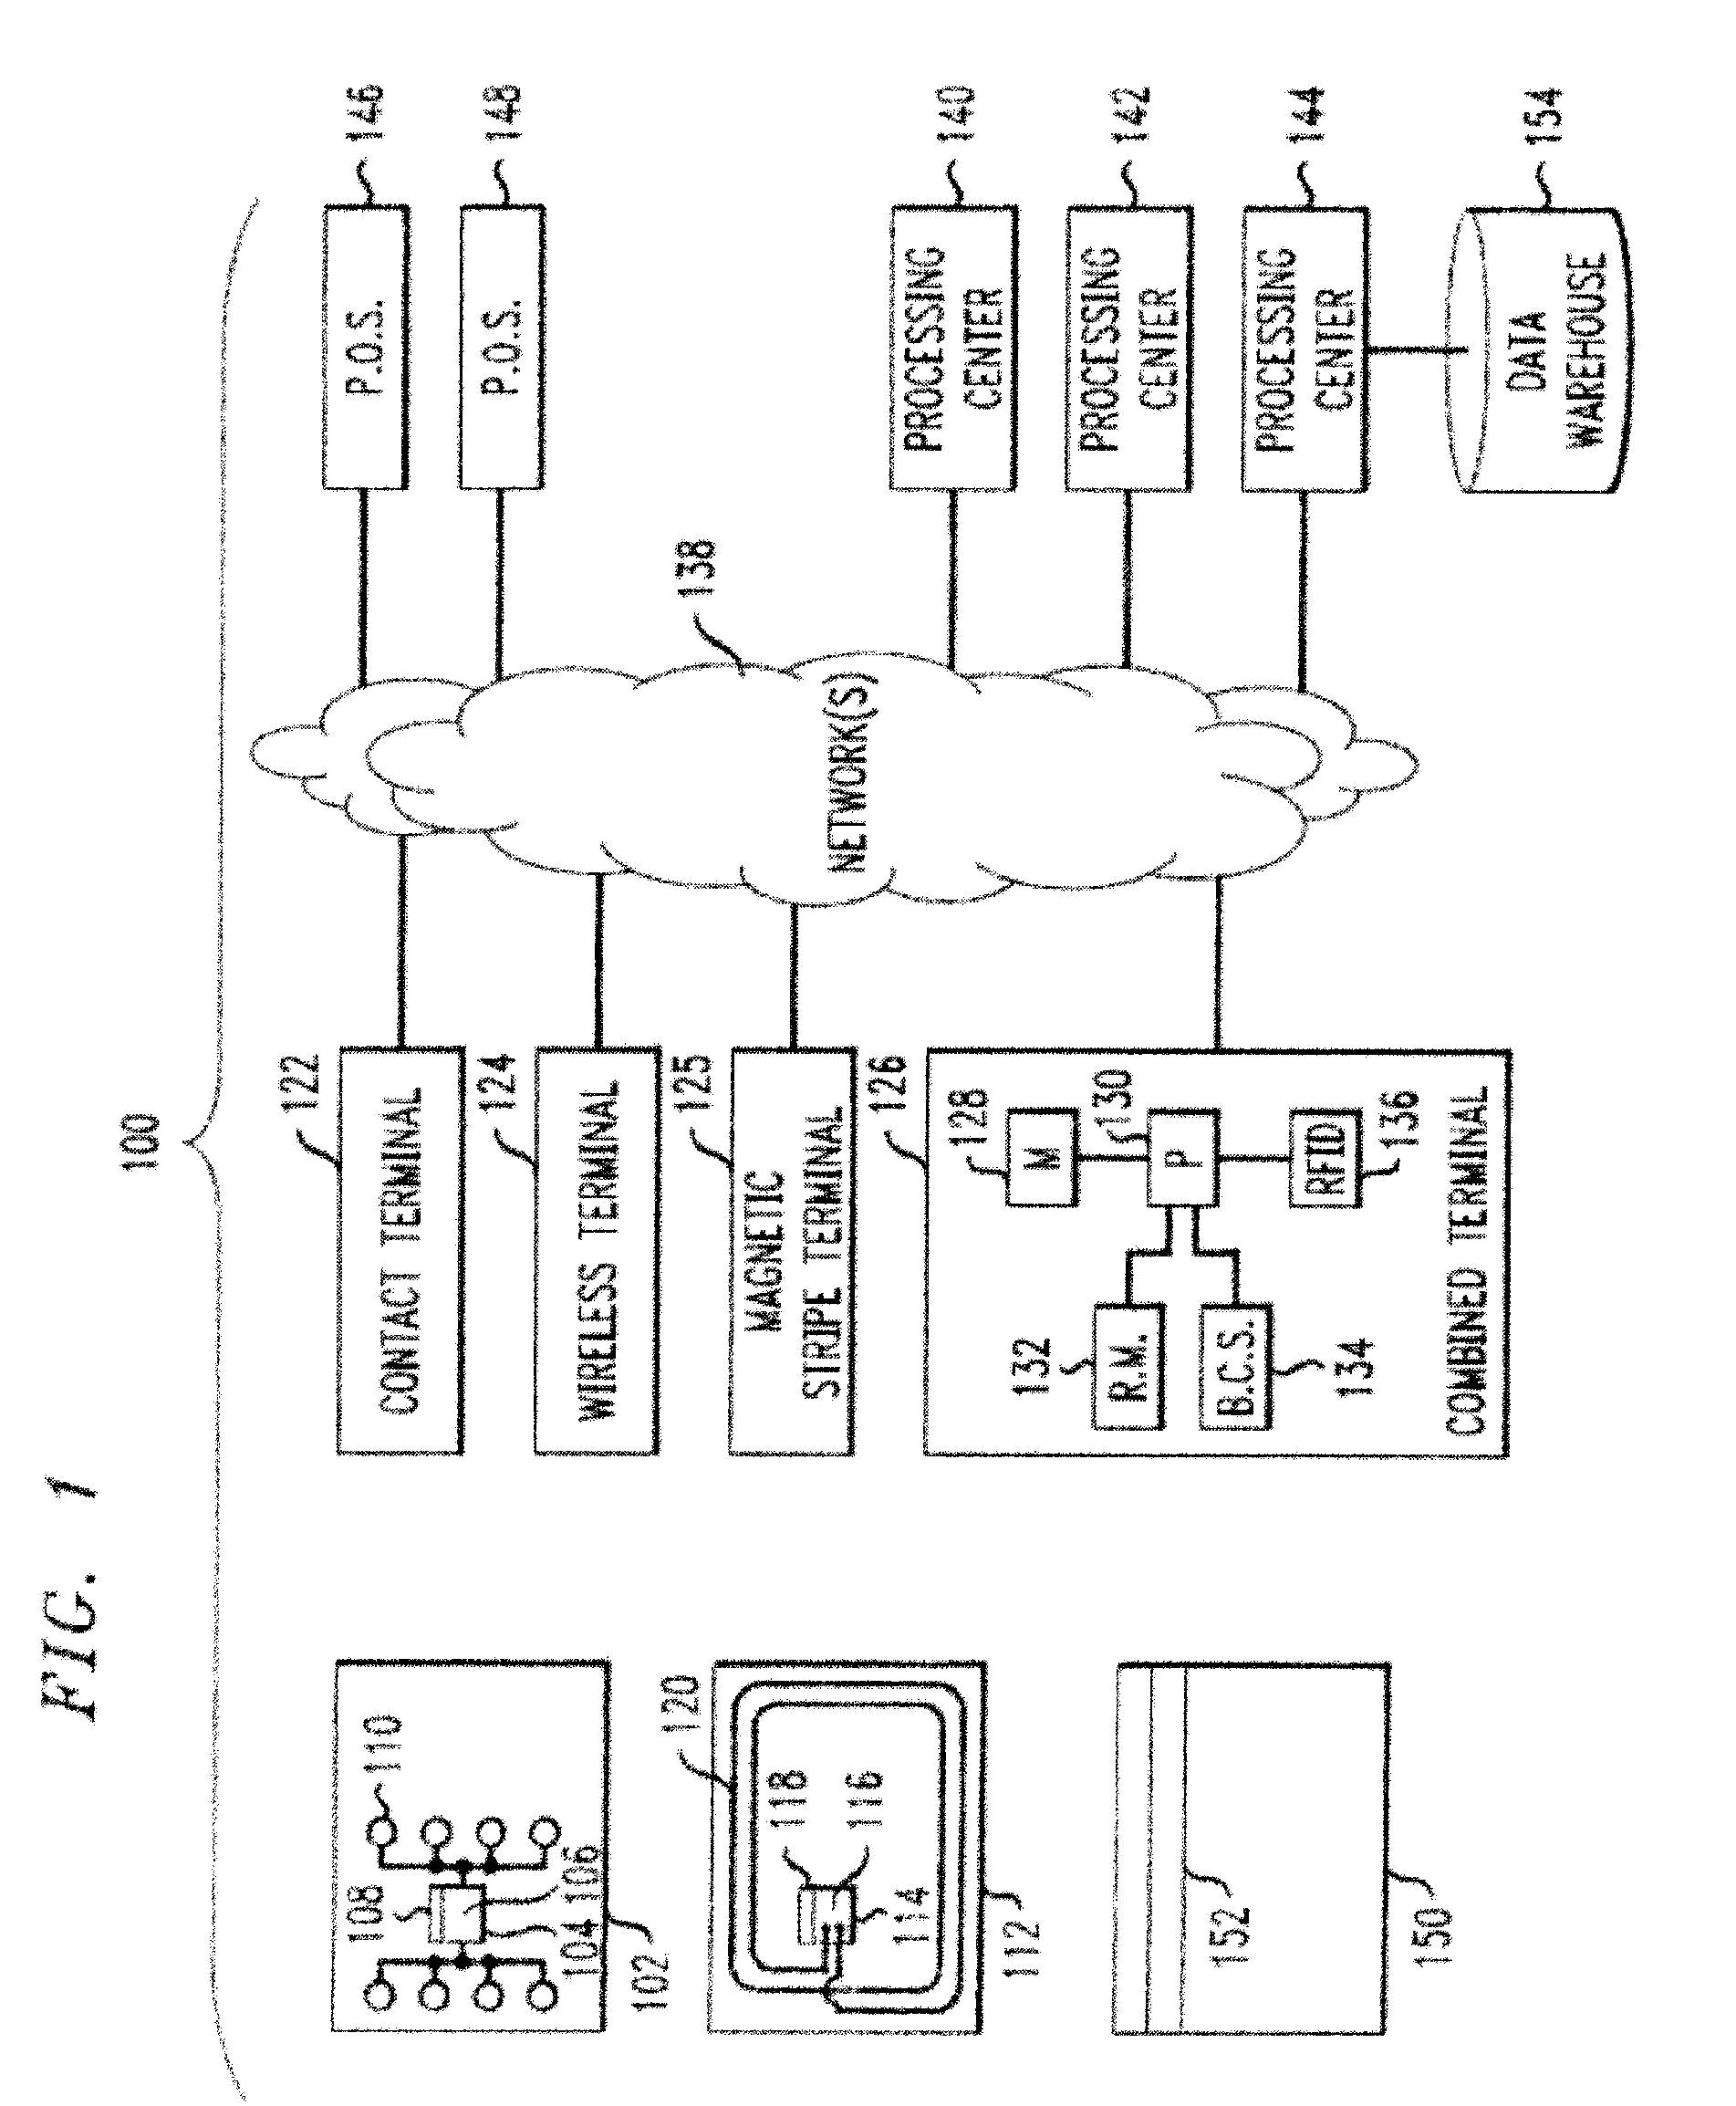 Method and apparatus for addressing issuer hold for automated fuel dispenser transactions in an electronic payment system